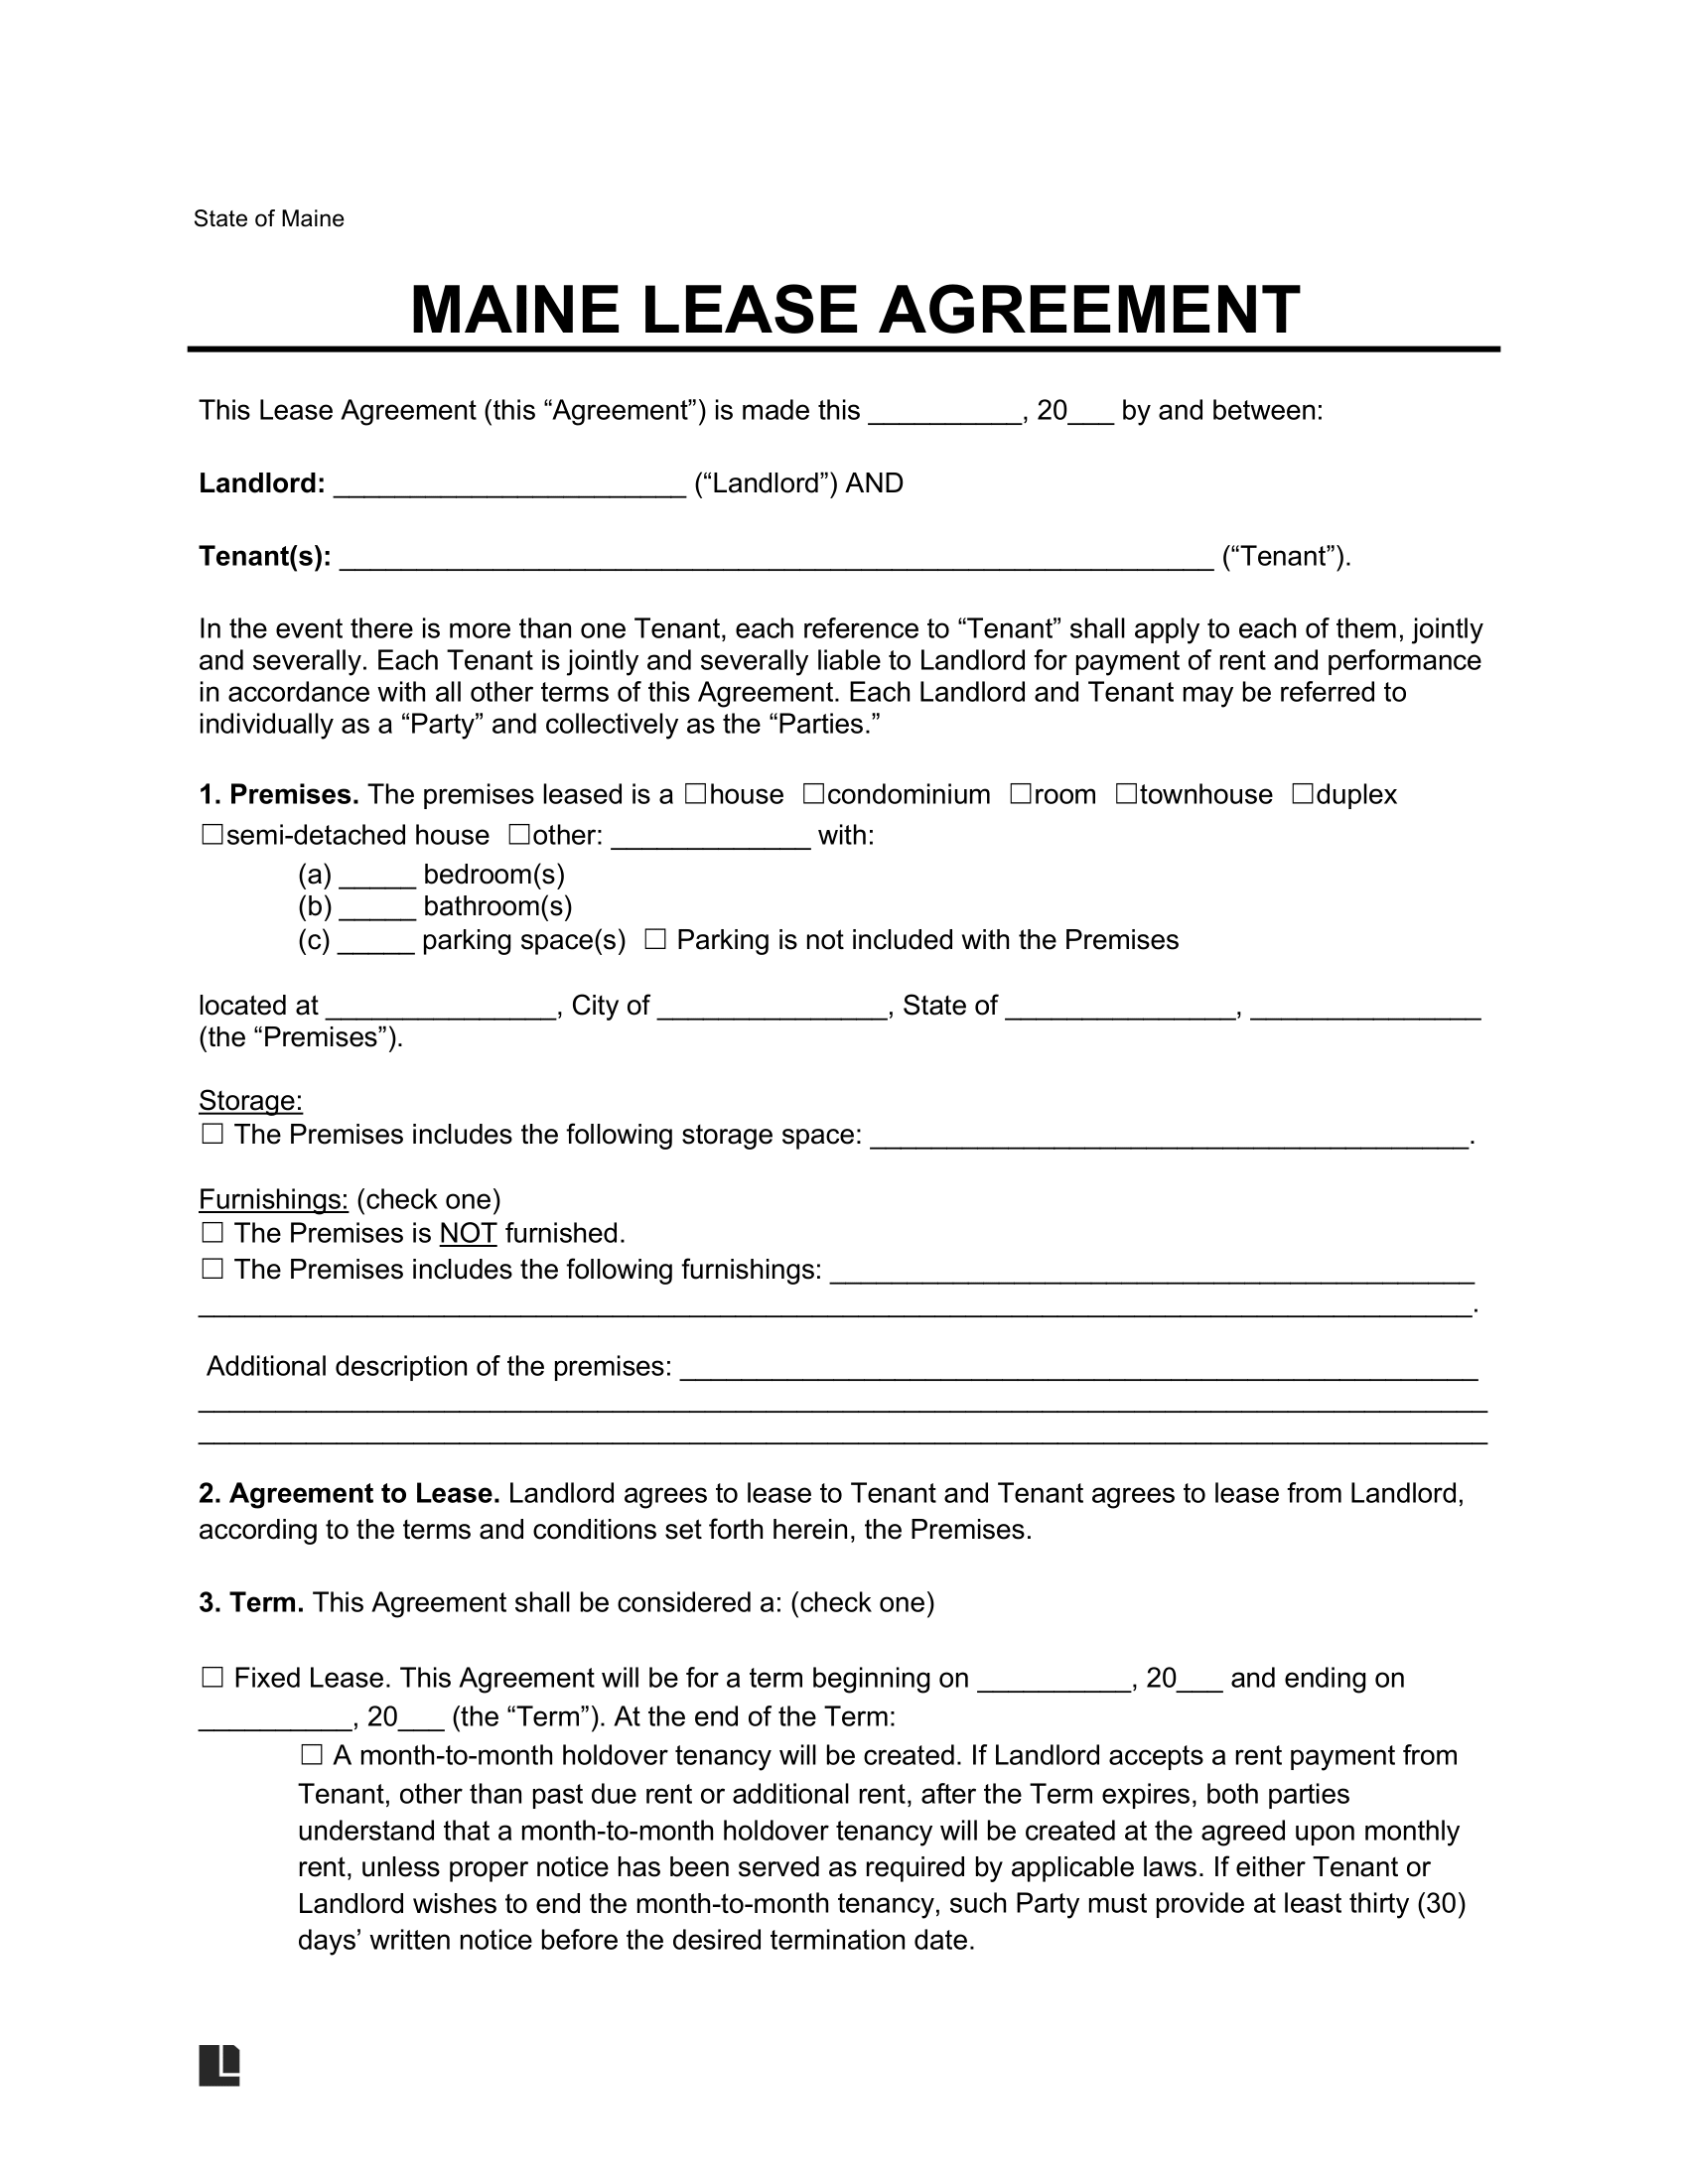 maine lease agreement